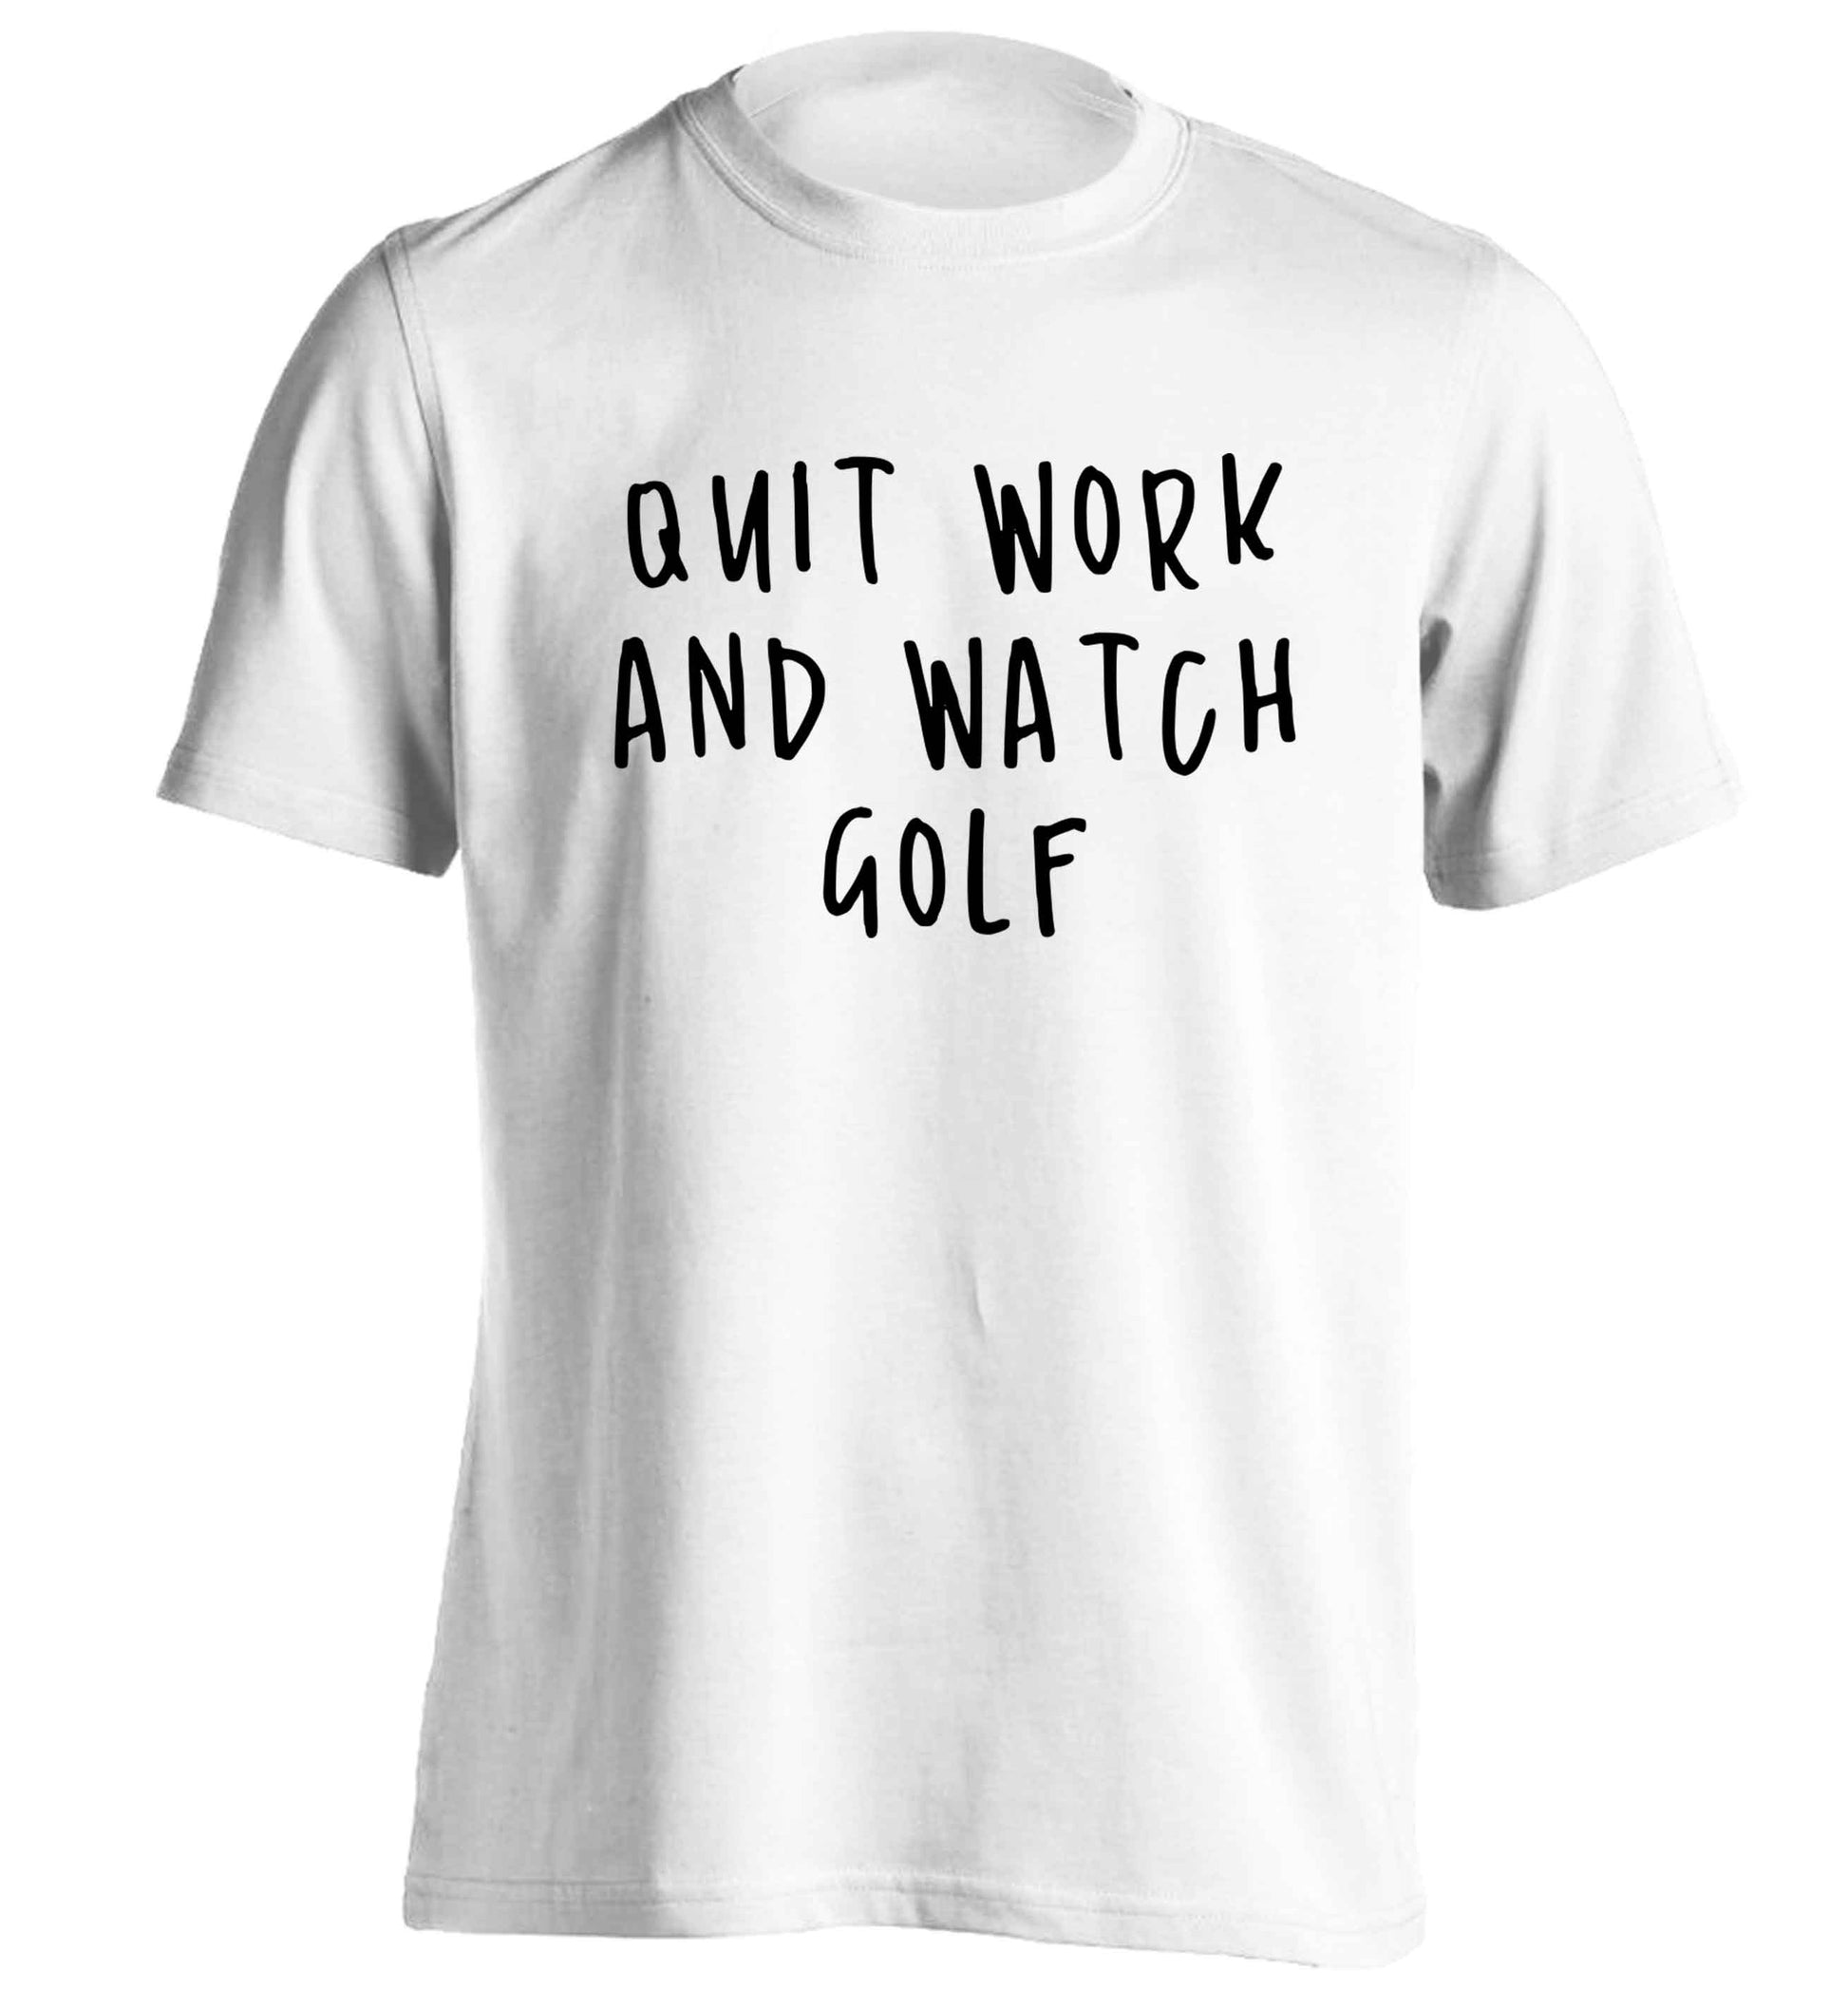 Quit work and watch golf adults unisex white Tshirt 2XL